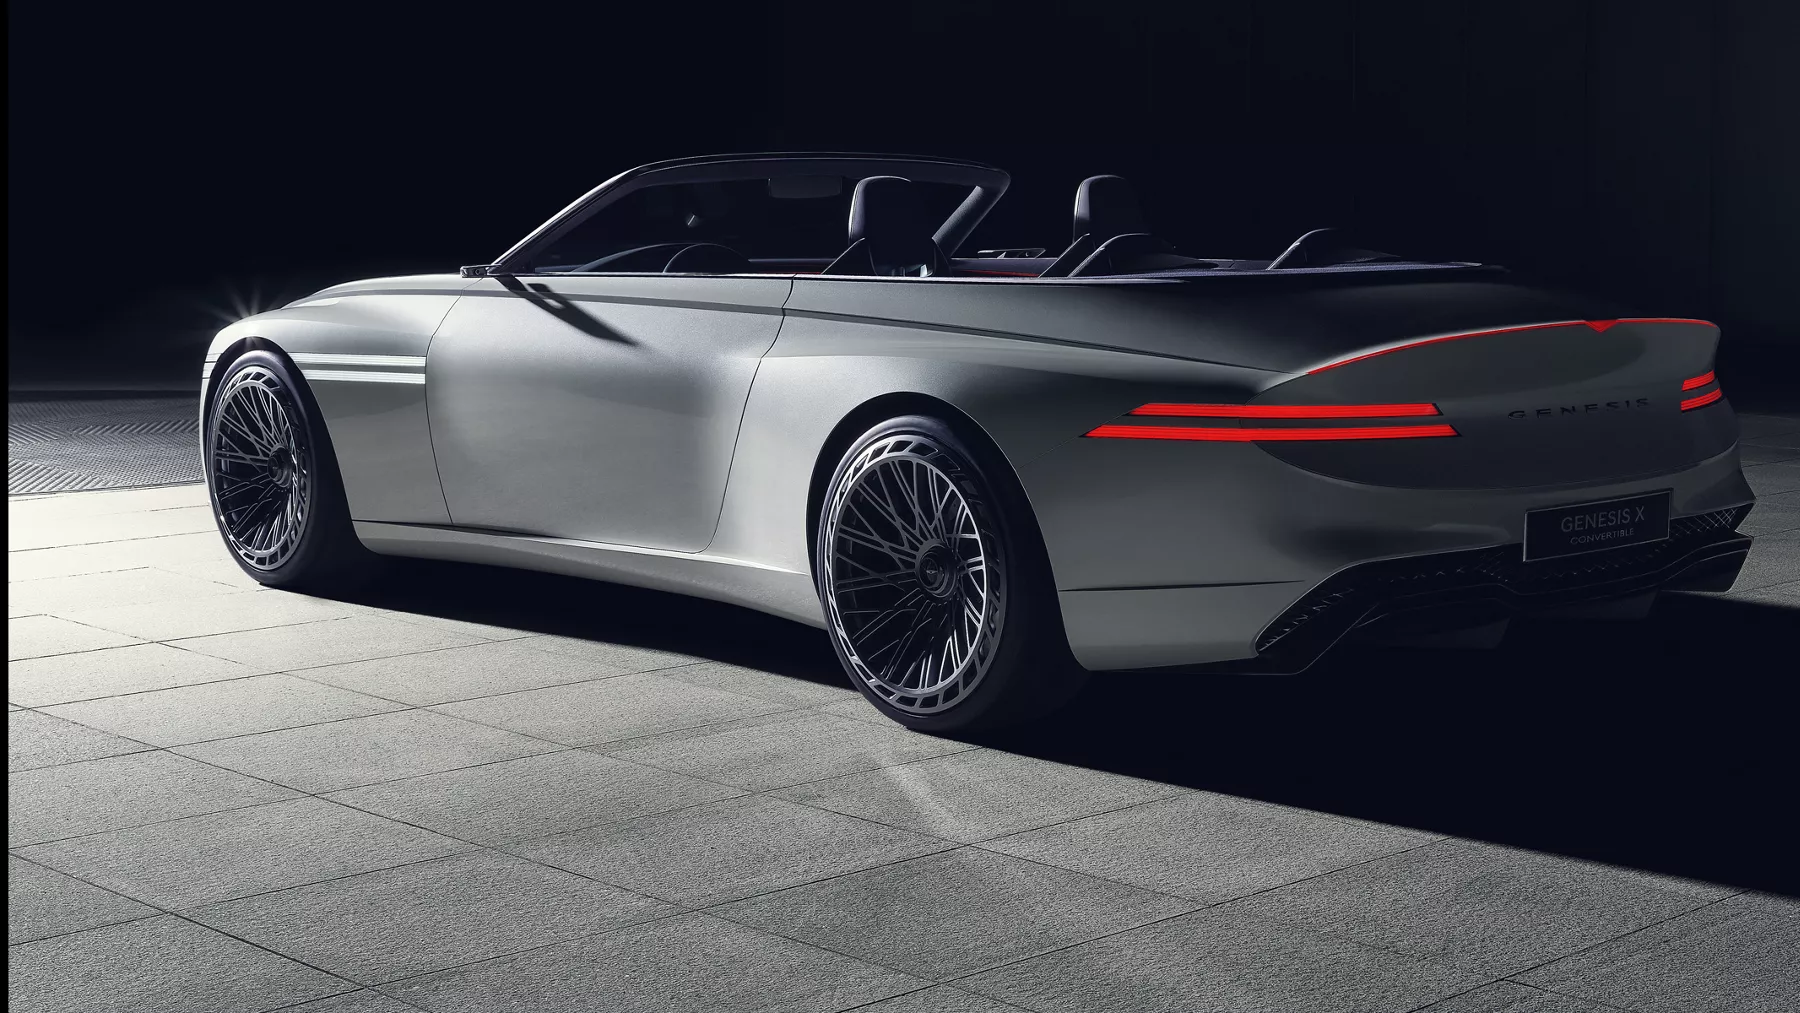 Rear view of X Convertible Concept at night with taillights illuminated.